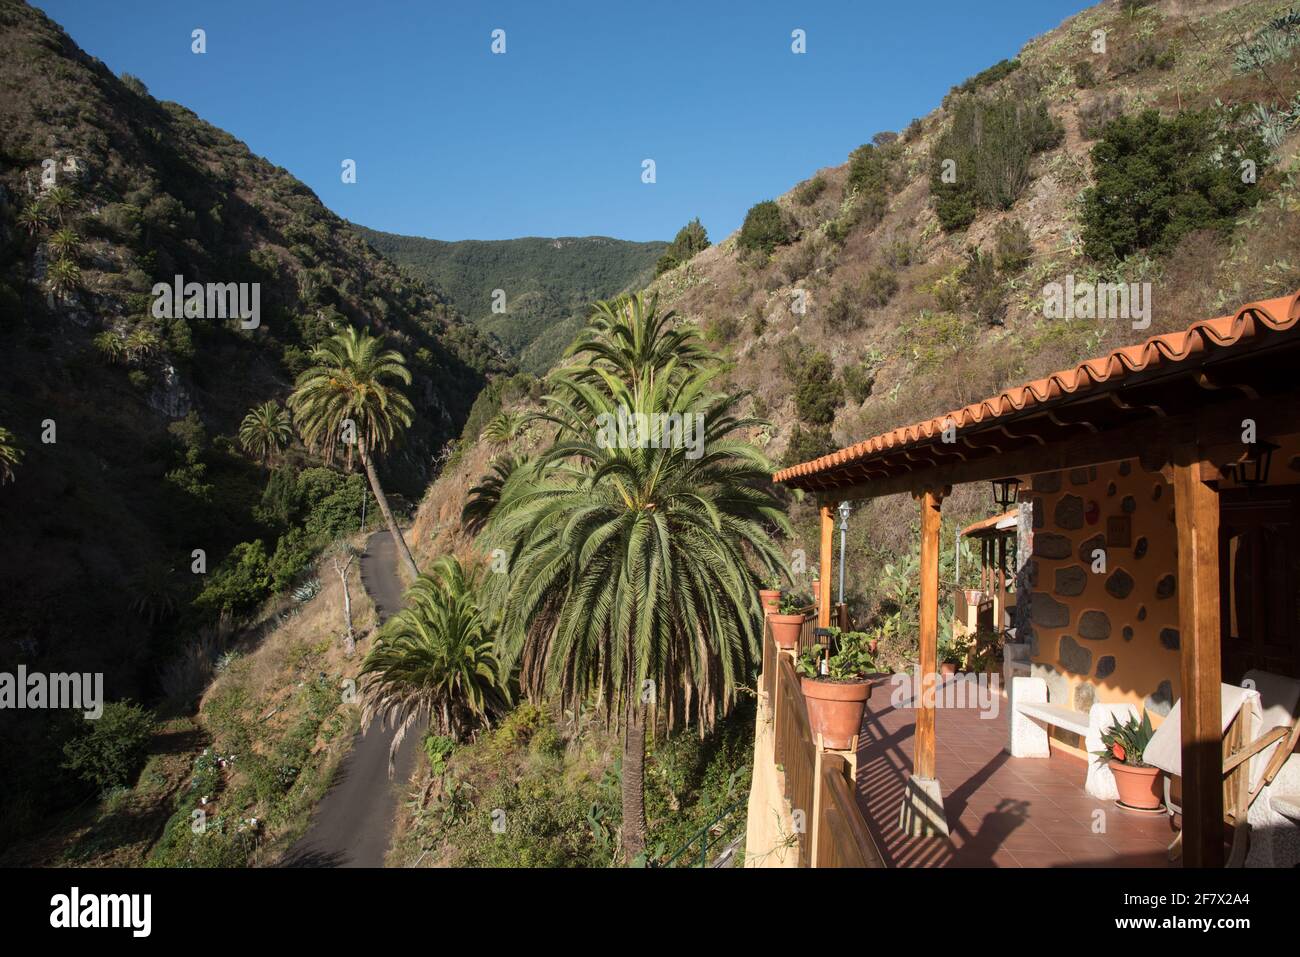 La Era Vieja is a holiday home situated at the high end of Valle Hermoso at La Gomera in Canary Islands archipelago. Stock Photo